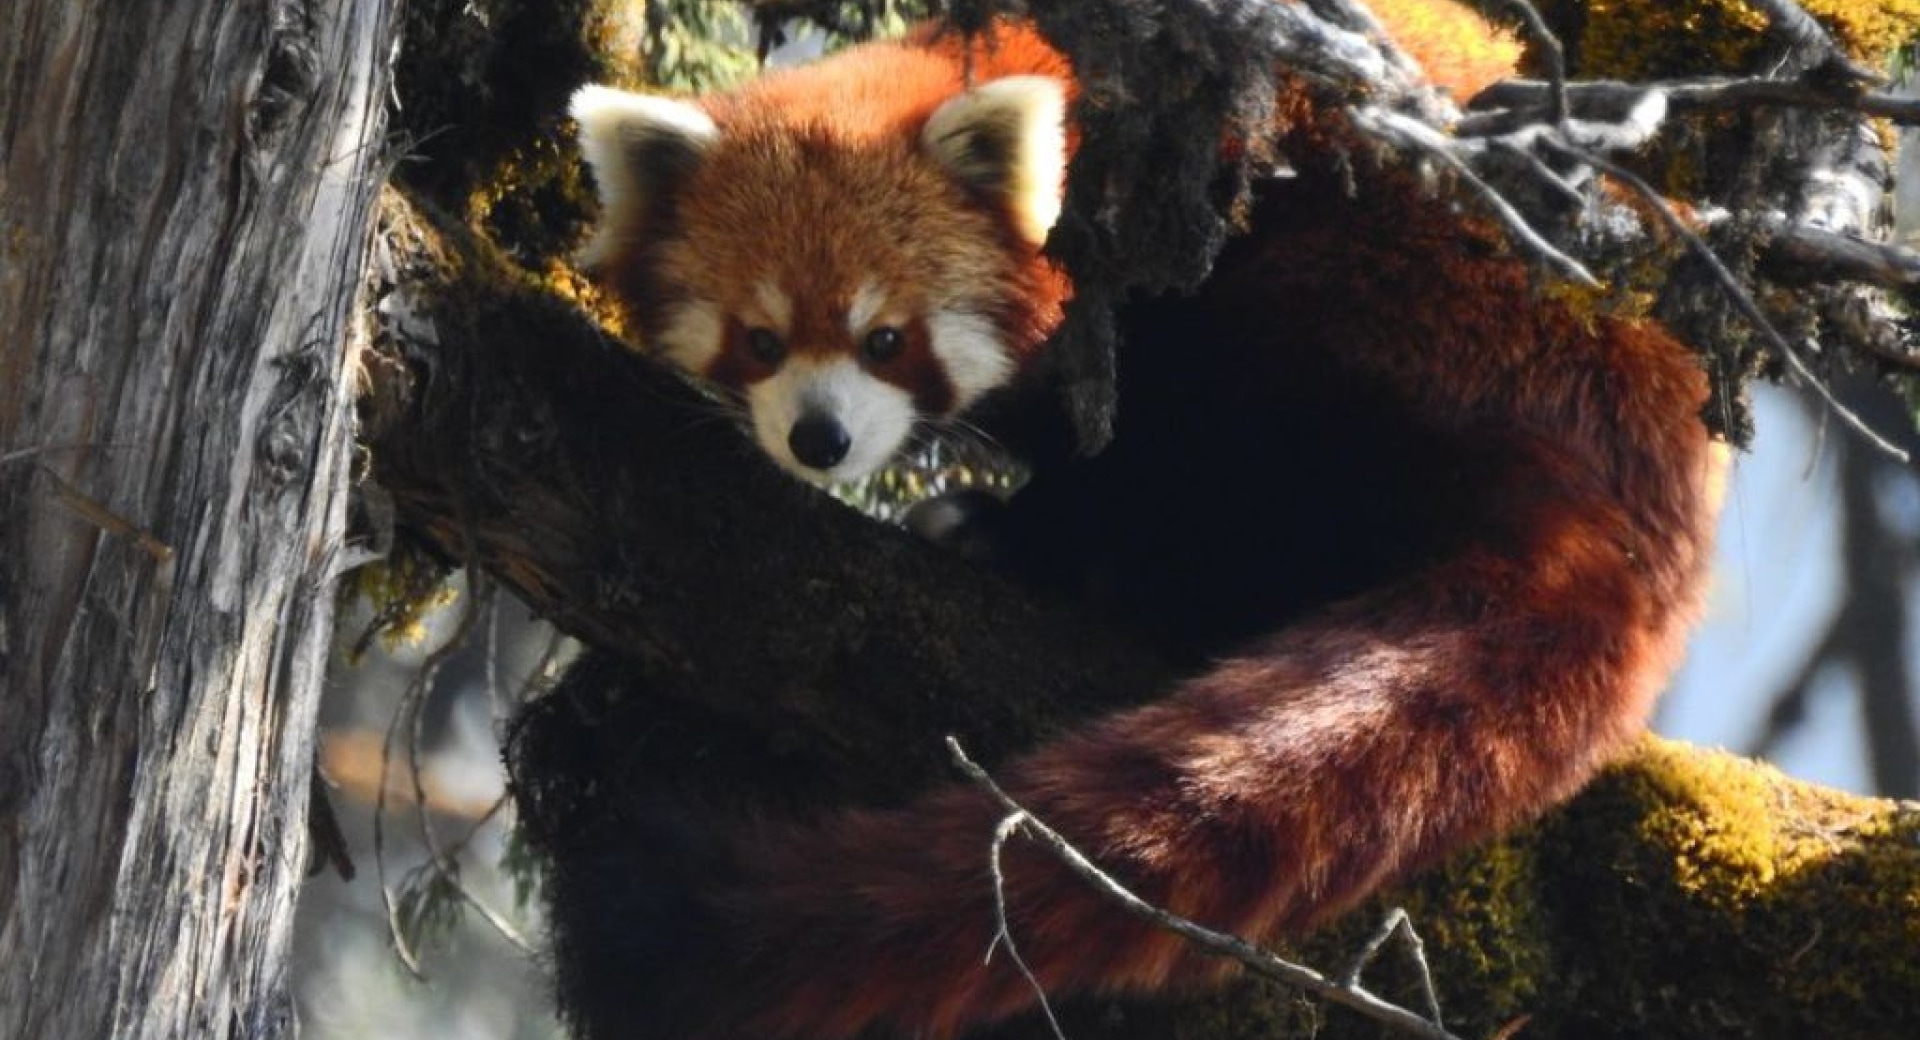 Thanks To You, We're Helping Red Pandas and Communities Thrive